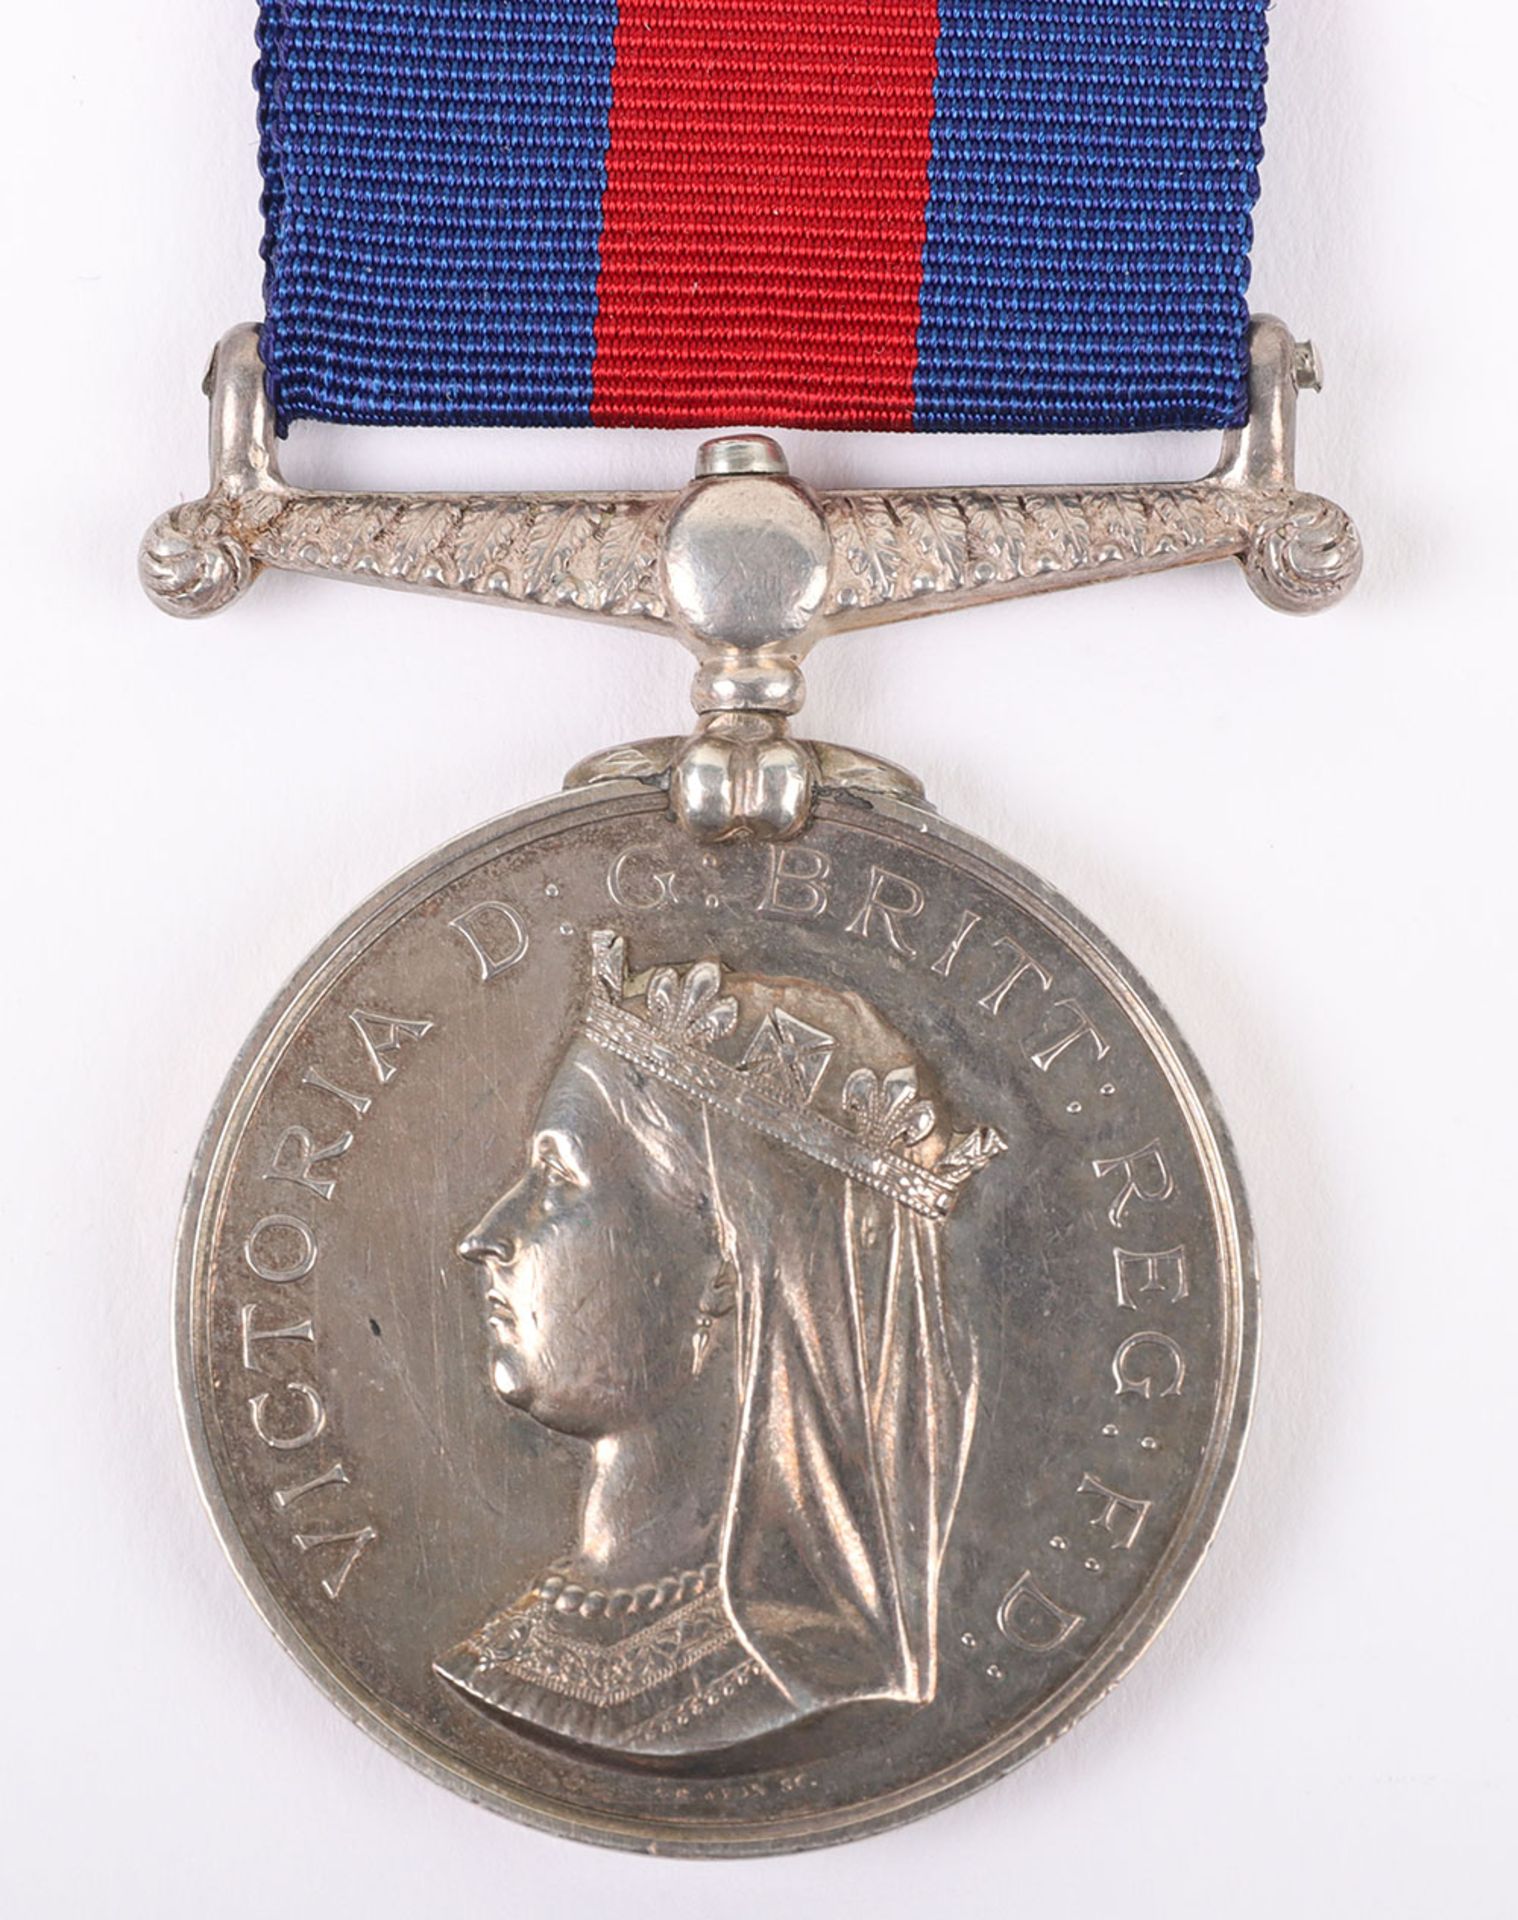 Victorian New Zealand 1845-66 Medal to the 43rd Regiment of Foot with Original Documentation